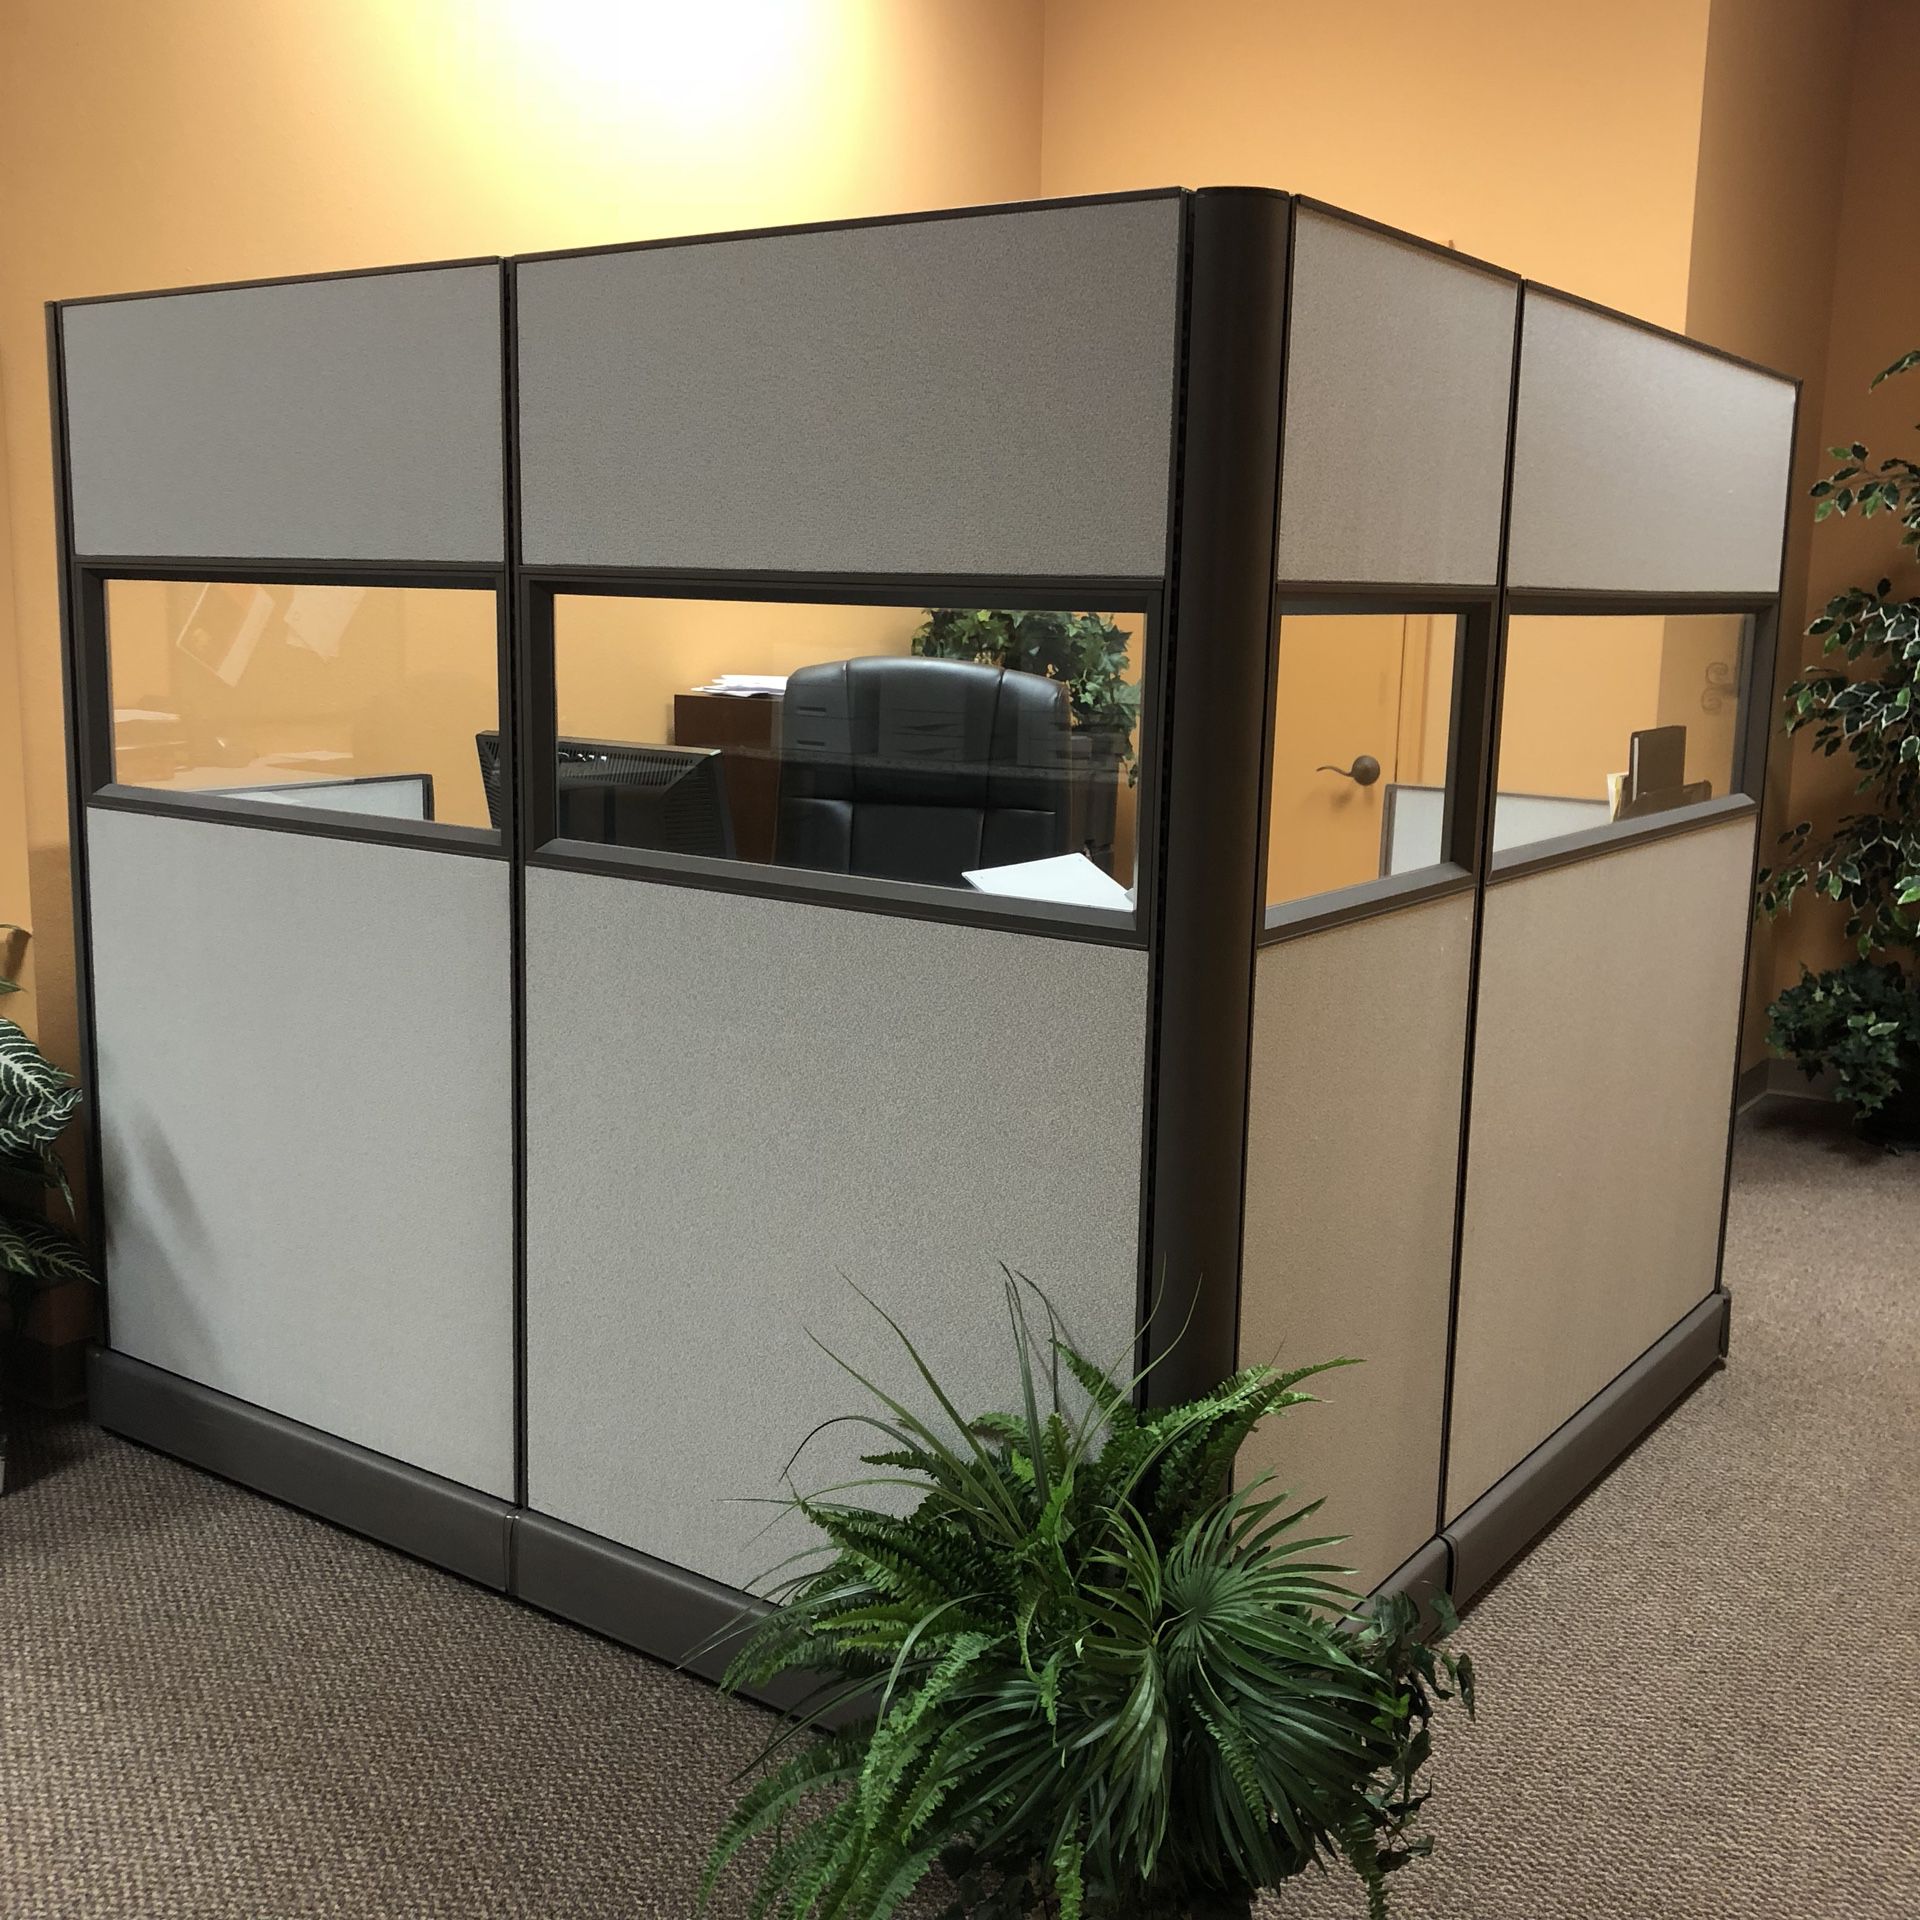 Brand New single 6x6 Office Cubicle with glass stackers.